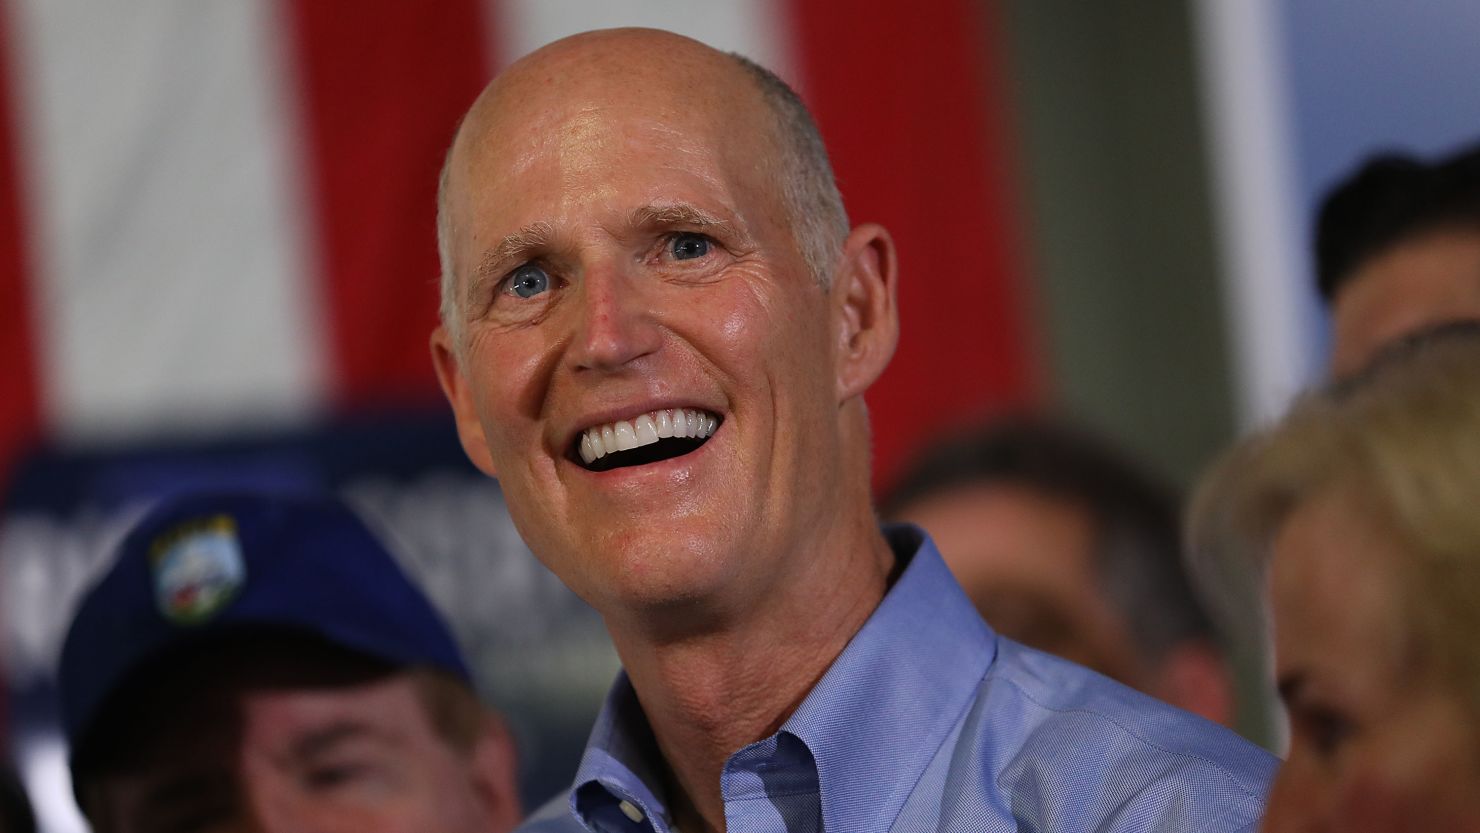 HIALEAH, FLORIDA - NOVEMBER 05:  Florida governor and Republican senatorial candidate Rick Scott addresses the crowd as he attends a Get out the Vote Rally at AmeriKooler on November 05, 2018 in Hialeah, Florida. Governor Scott is facing off against Sen. Bill Nelson (D-FL) on election day. (Photo by Joe Raedle/Getty Images)